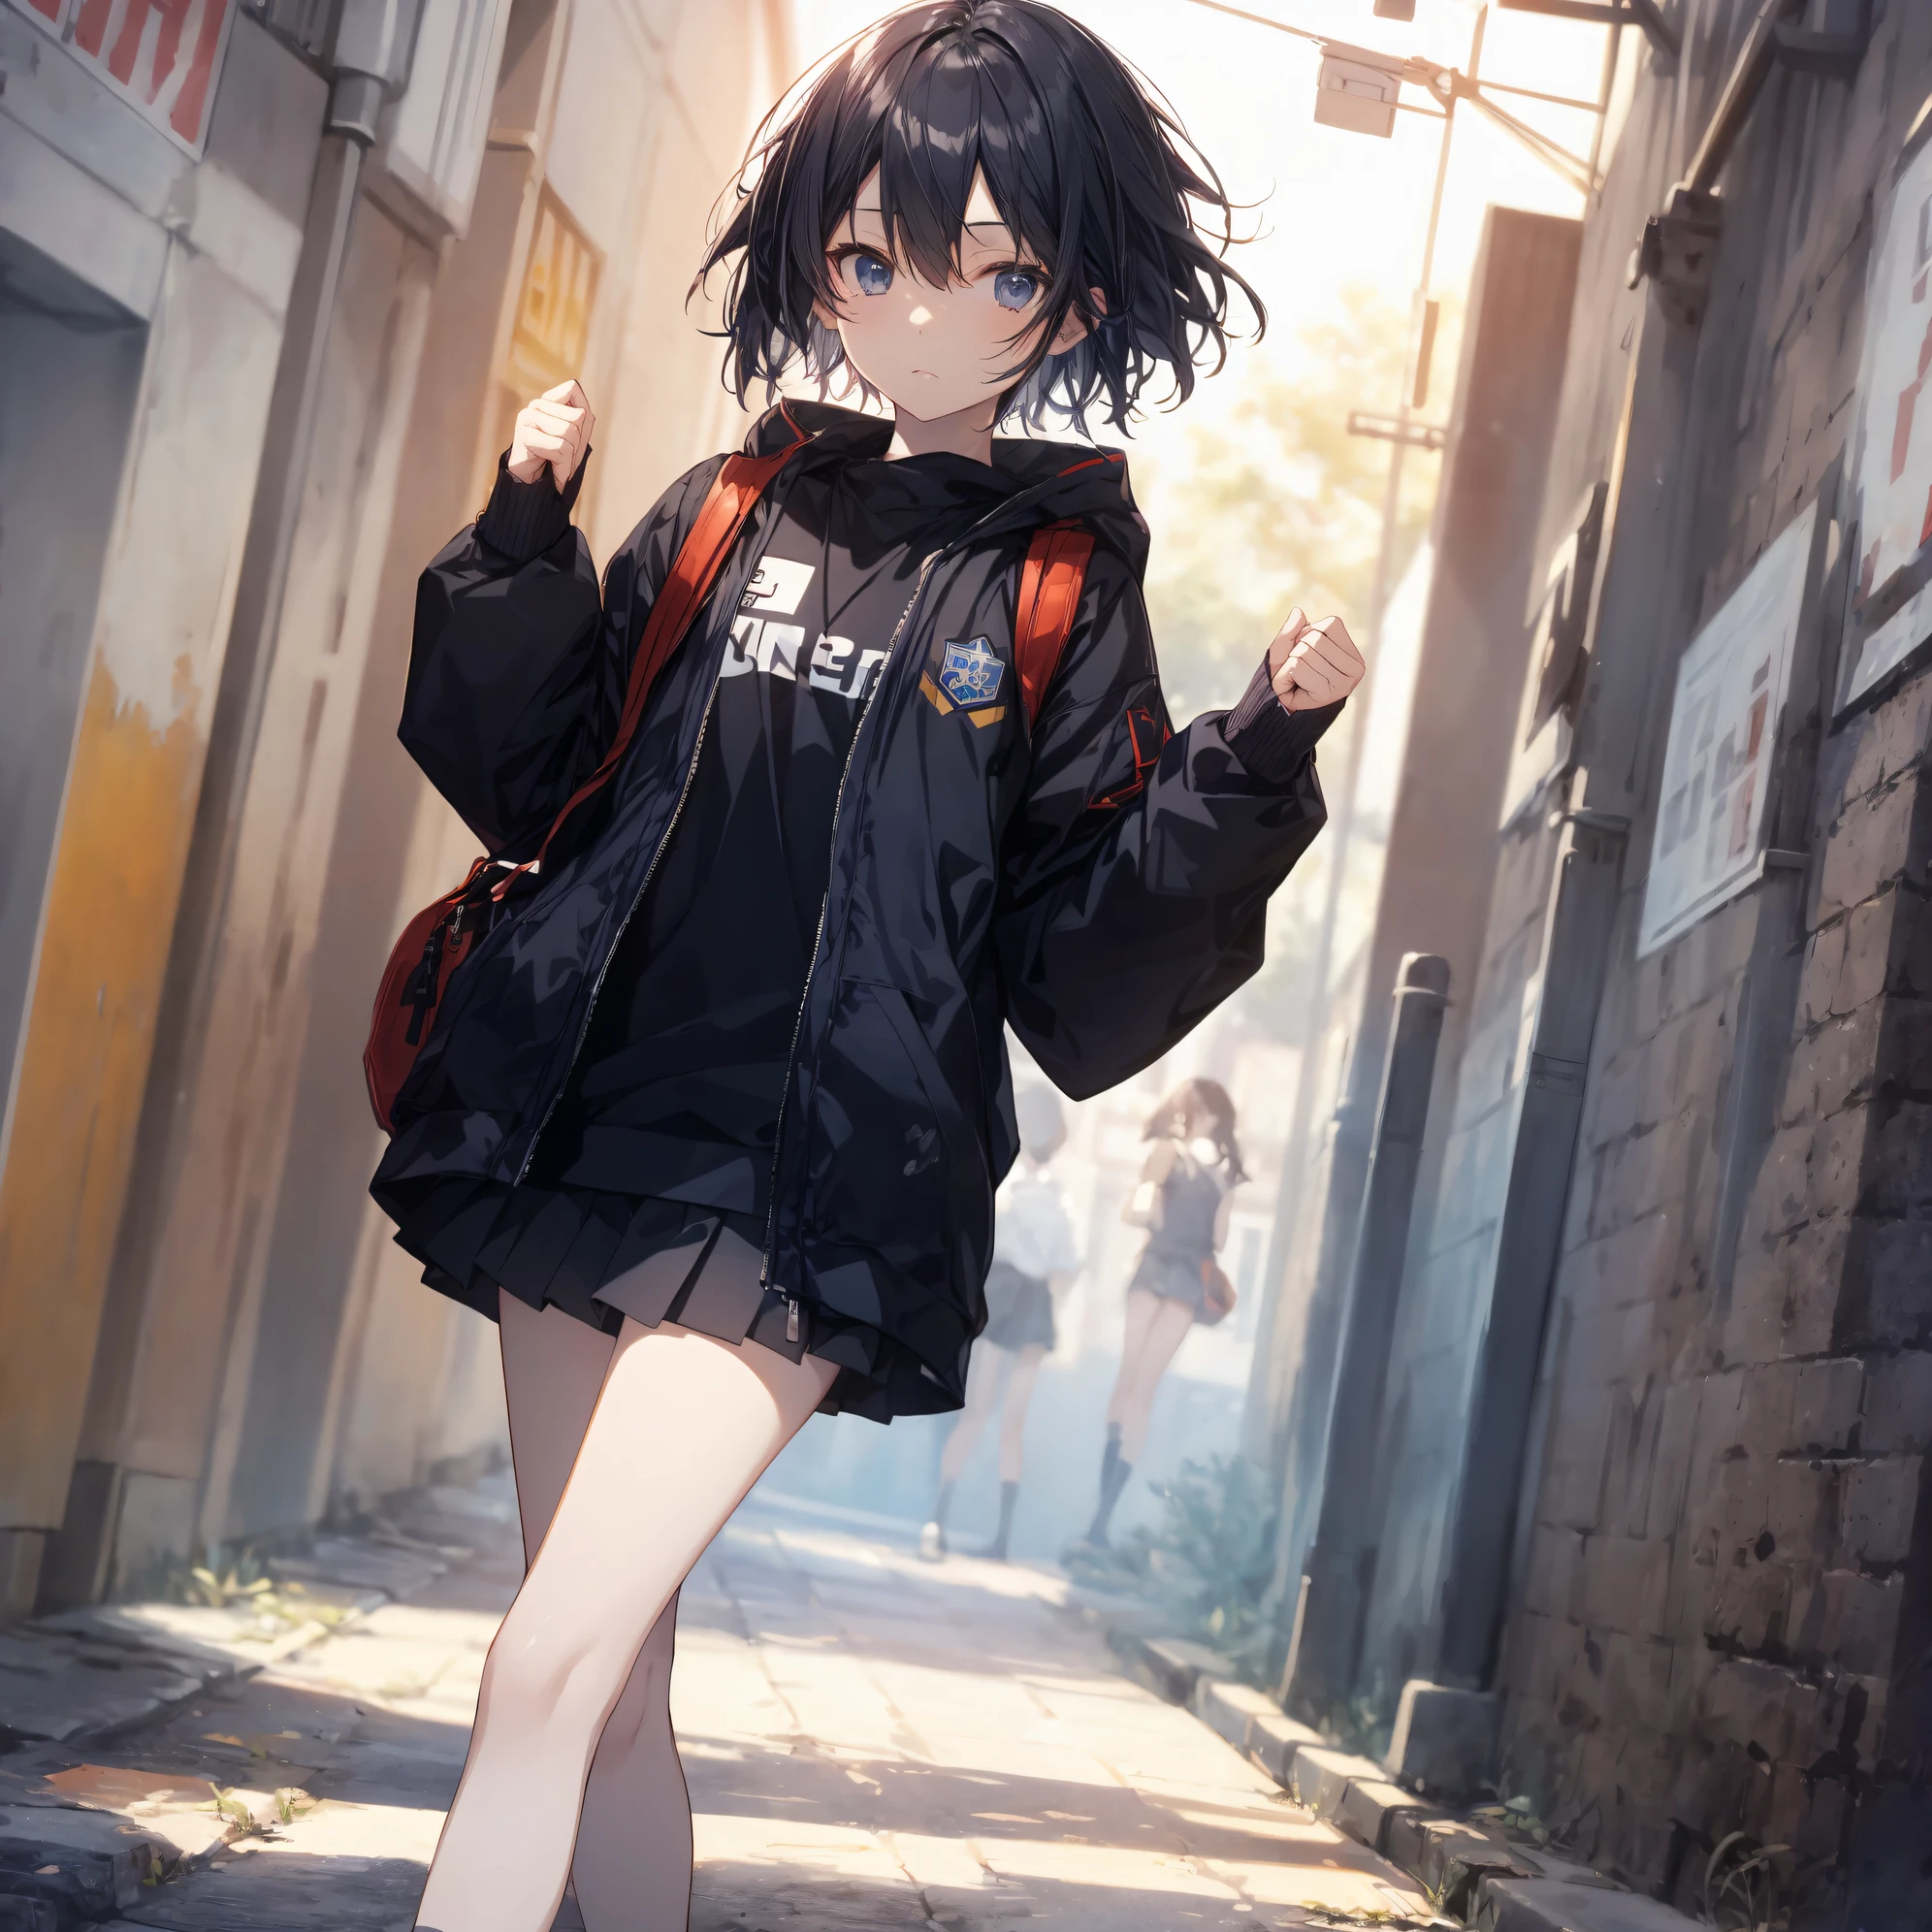 Top quality by creator God, Ultra-detailed, anime moe art style,Best Anime 8K Konachan Wallpapers,Pixiv Contest Winner,Perfect Anatomy, BREAK,(Draw a girl sleepily walking to school. ),BREAK, 1girl is a cool beautiful girl, (Solo,,,13years:1.3),a junior high school student, Androgynous attraction, (Center part very short hair), hair messy,Forehead, Full limbs, complete fingers,flat chest, Small butt, groin, Small eyes,Beautiful detailed black eyes,Well-proportioned iris and pupils,disgusted eye, , Skirt,On the way to school. BREAK,High resolution,super detailed skin, Best lighting by professional AI, 8K, Illustration,